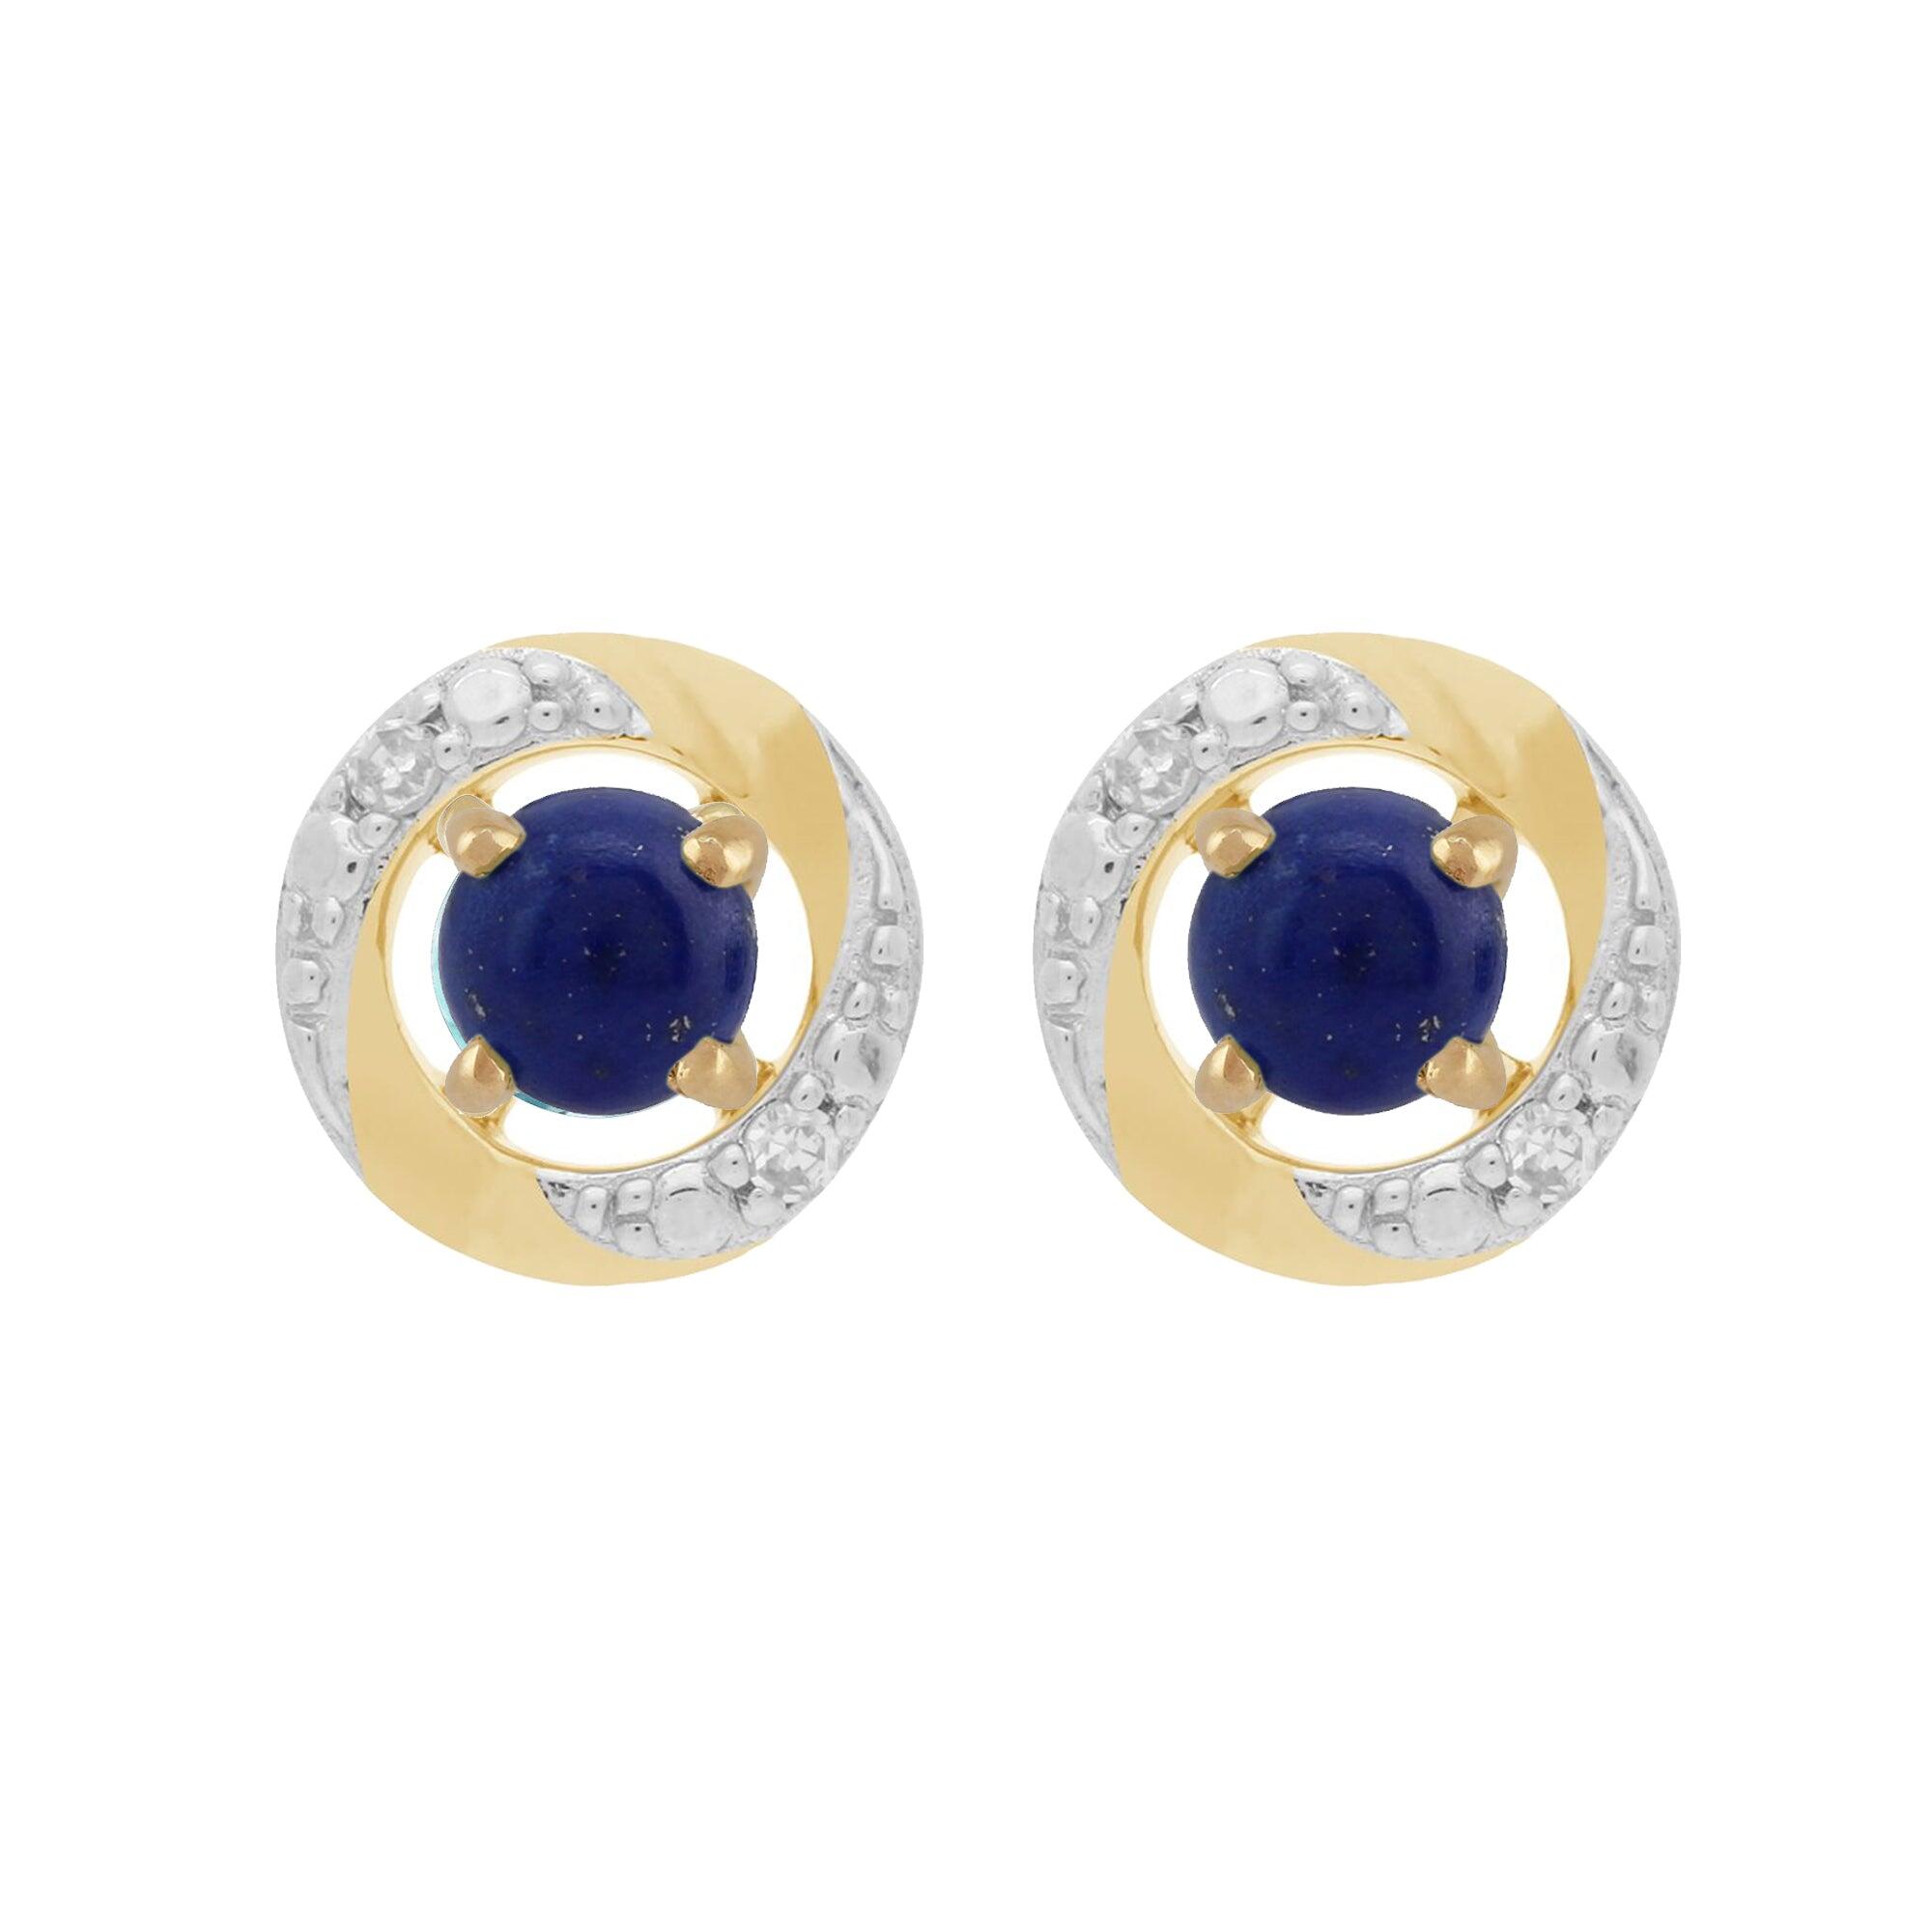 Classic Round Lapis Lazuli Stud Earrings with Detachable Diamond Halo Ear Jacket in 9ct Yellow Gold